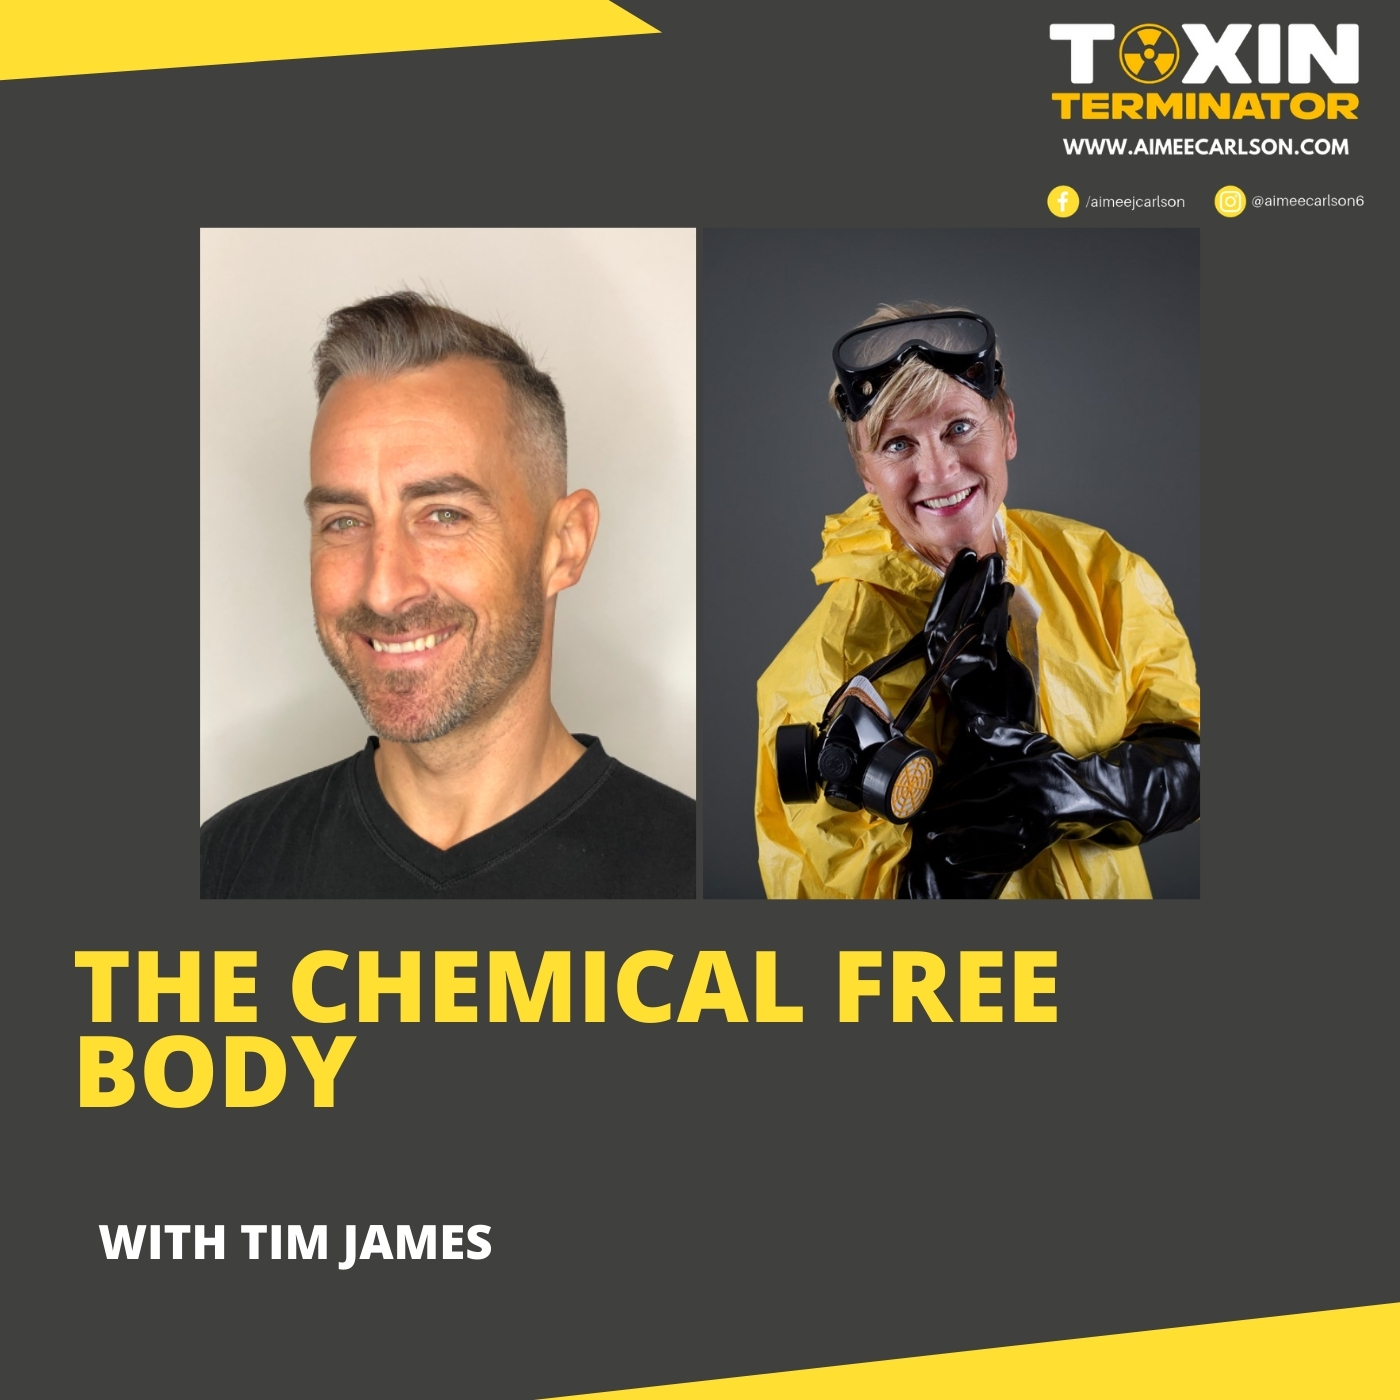 The Chemical Free Body with Tim James